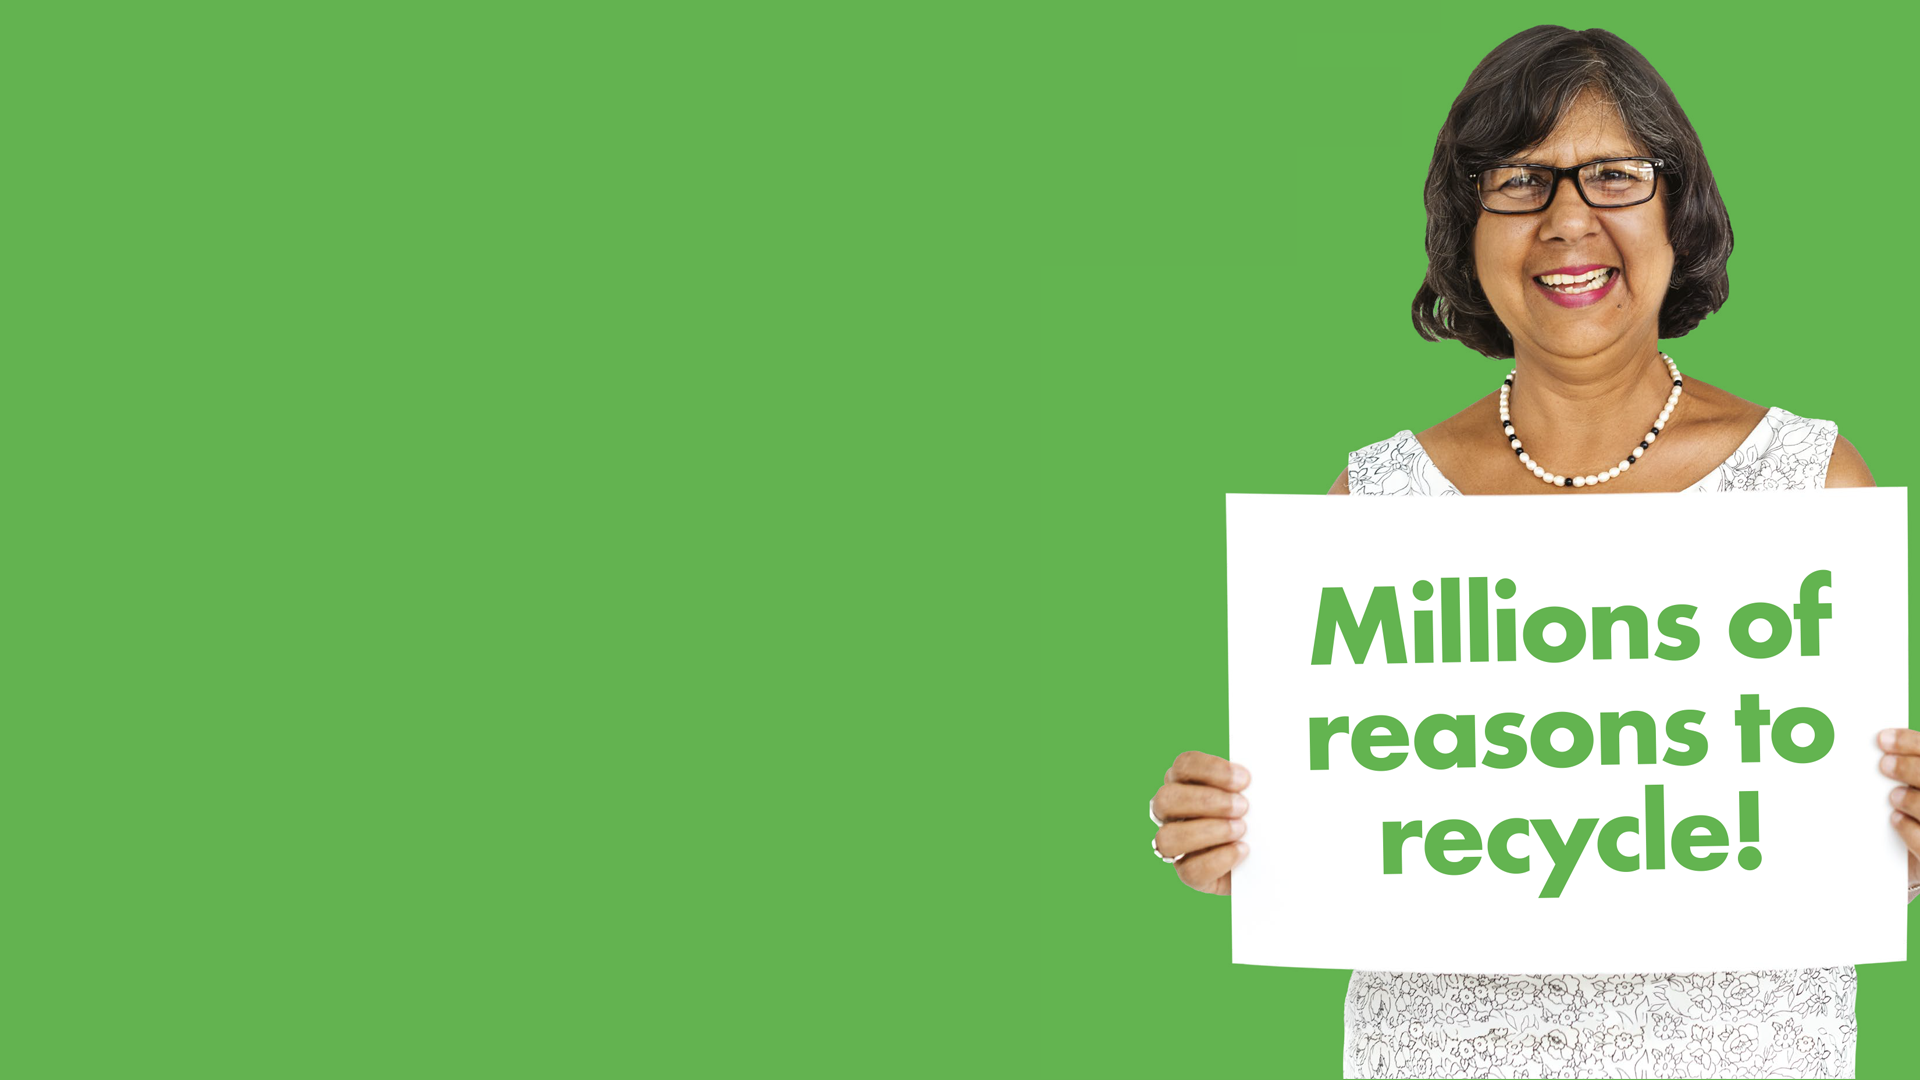 Green rectangle with a person holding up a sign that says 'millions of reasons to recycle'.